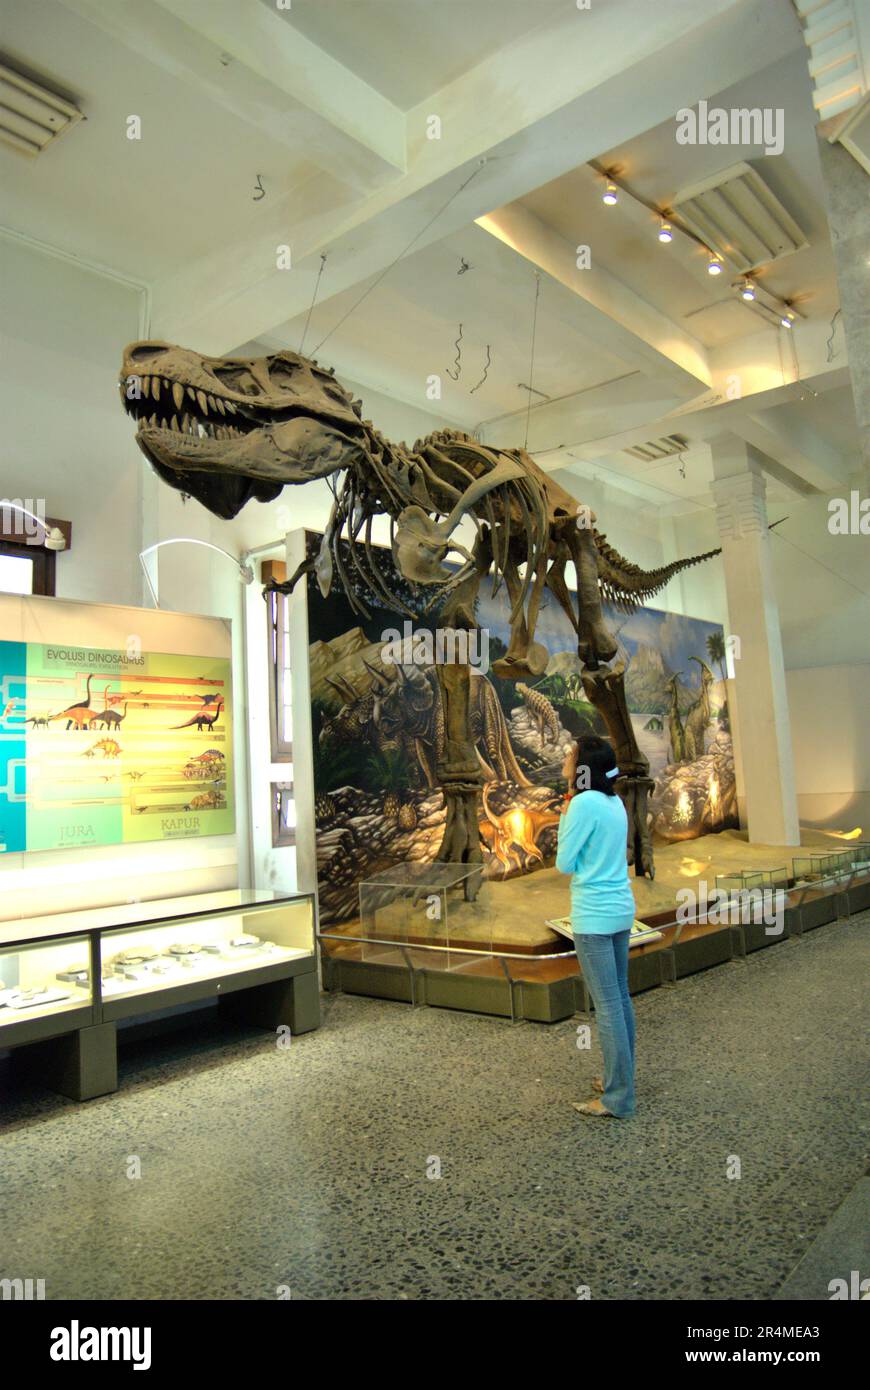 A woman visitor is paying attention to a reconstruction of a Tyrannosaurus rex at Museum Geologi (Geology Museum) in Bandung, West Java, Indonesia. Stock Photo